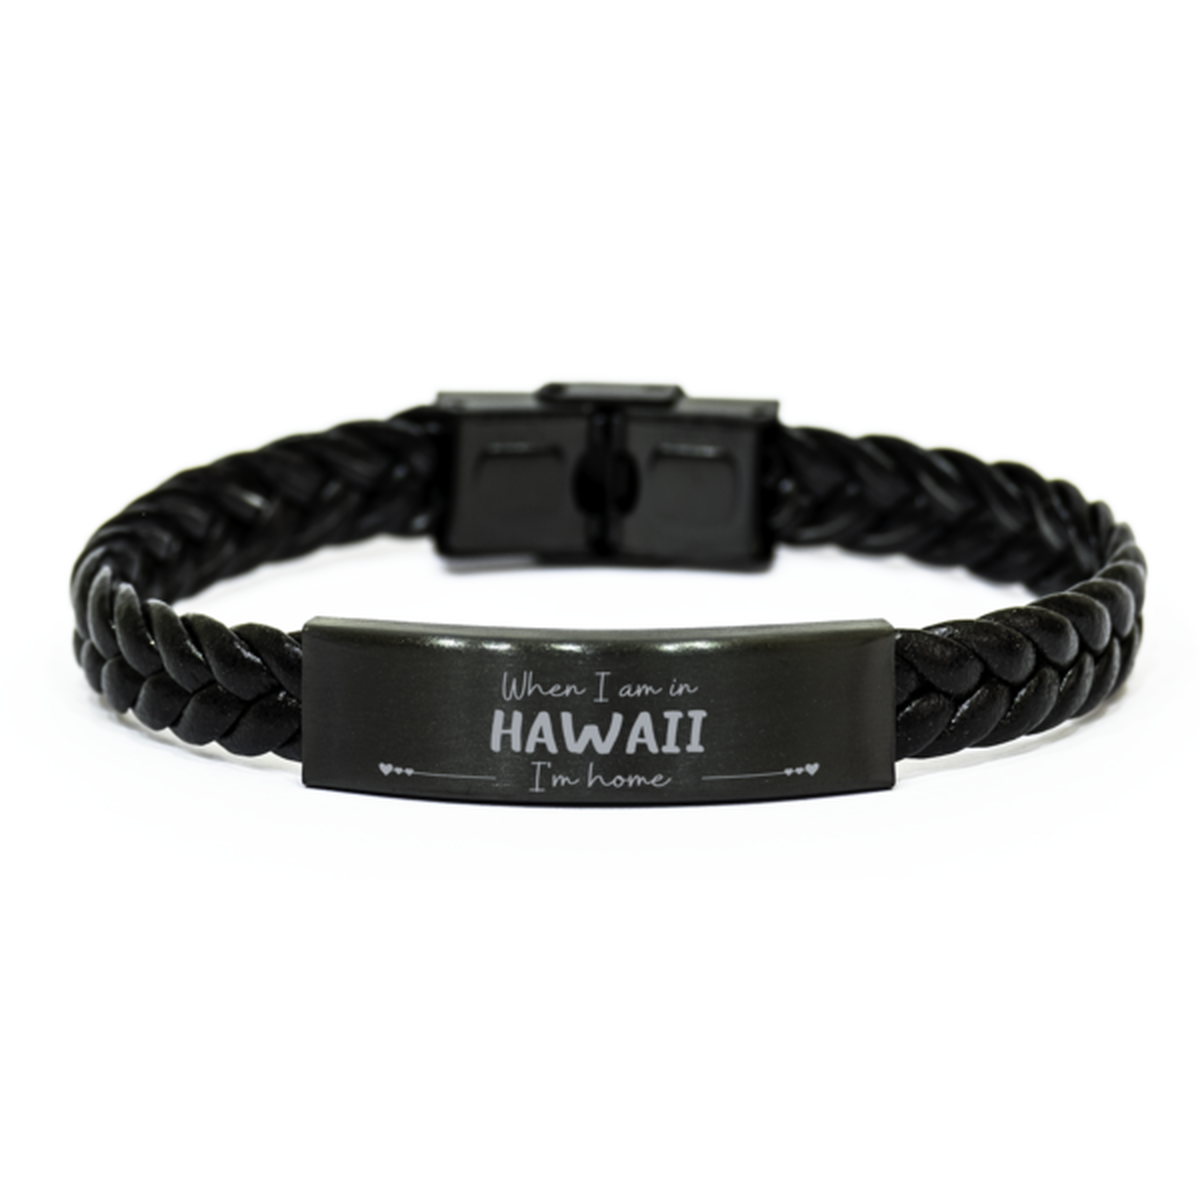 When I am in Hawaii I'm home Braided Leather Bracelet, Cheap Gifts For Hawaii, State Hawaii Birthday Gifts for Friends Coworker